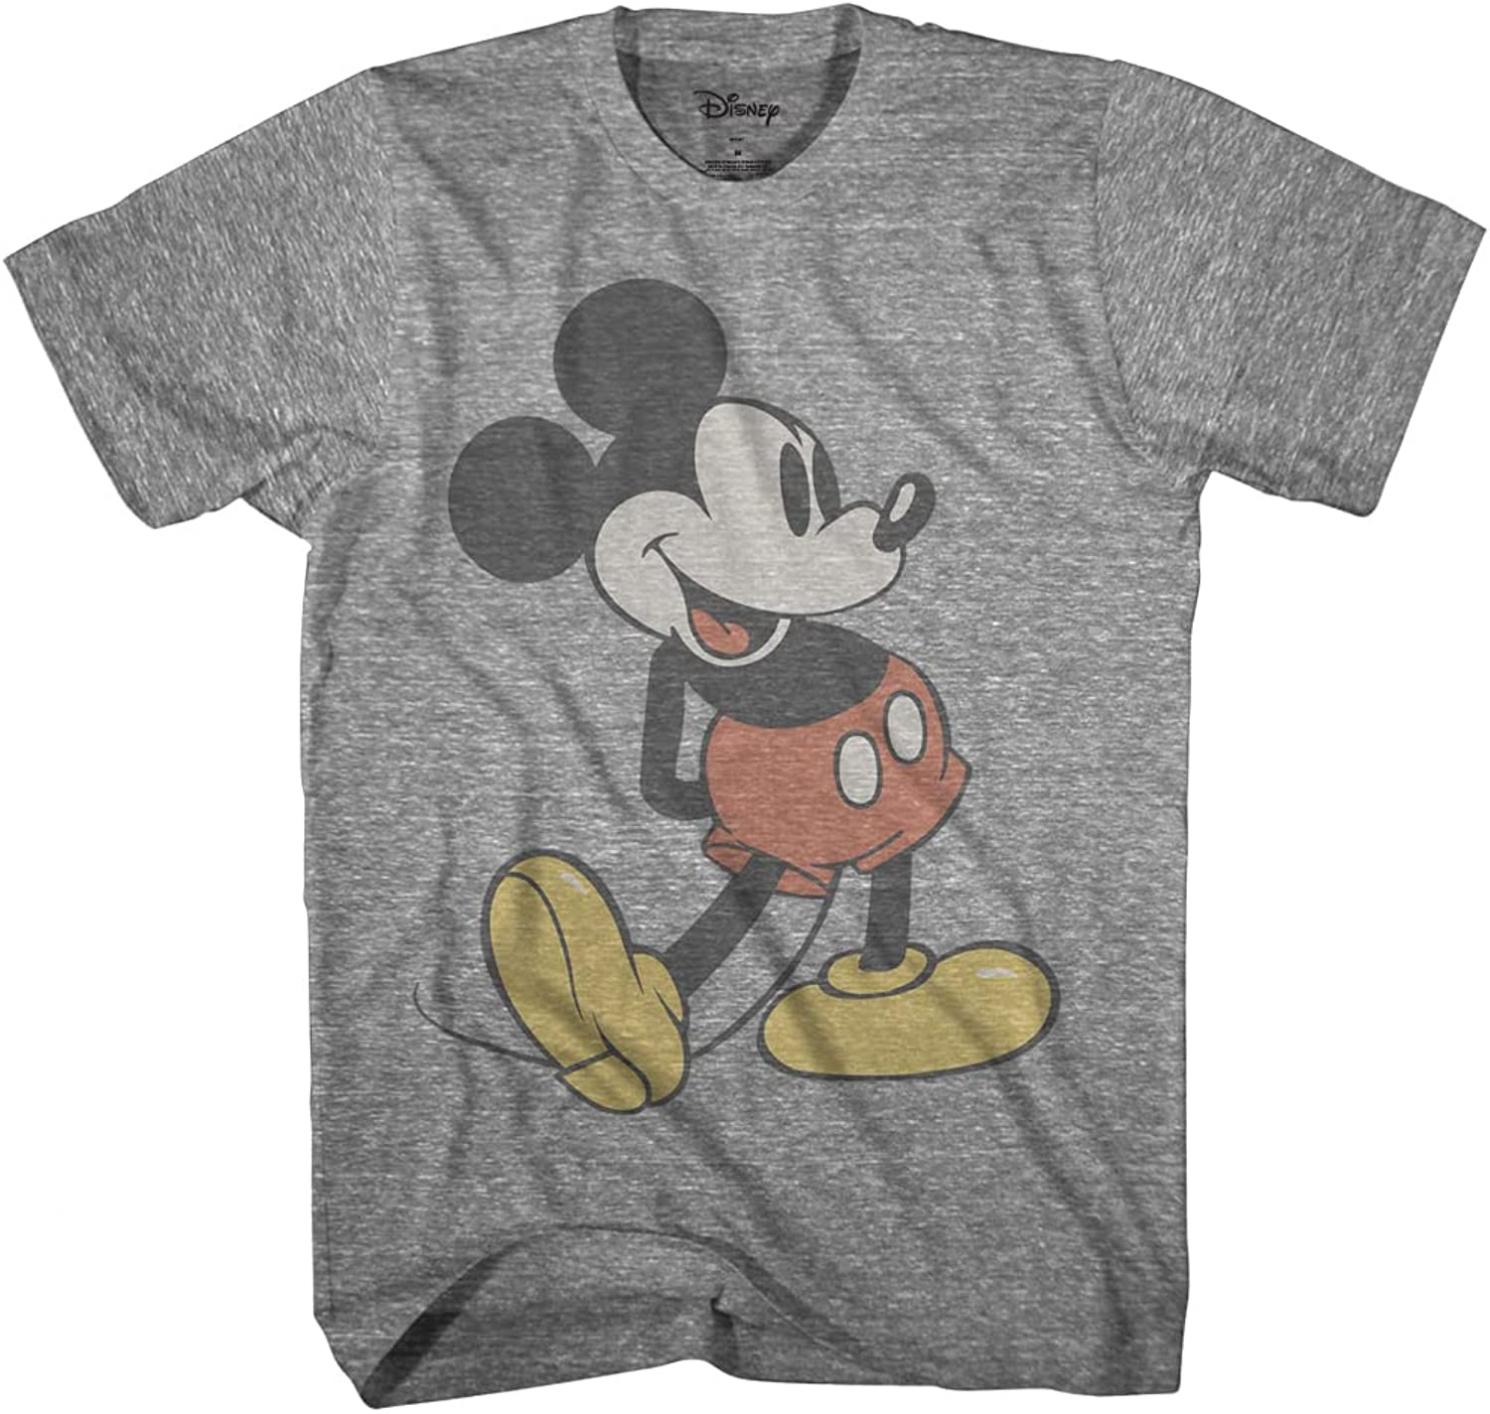 Disney Men's Giant Mickey Mouse Gray Graphic T-Shirt